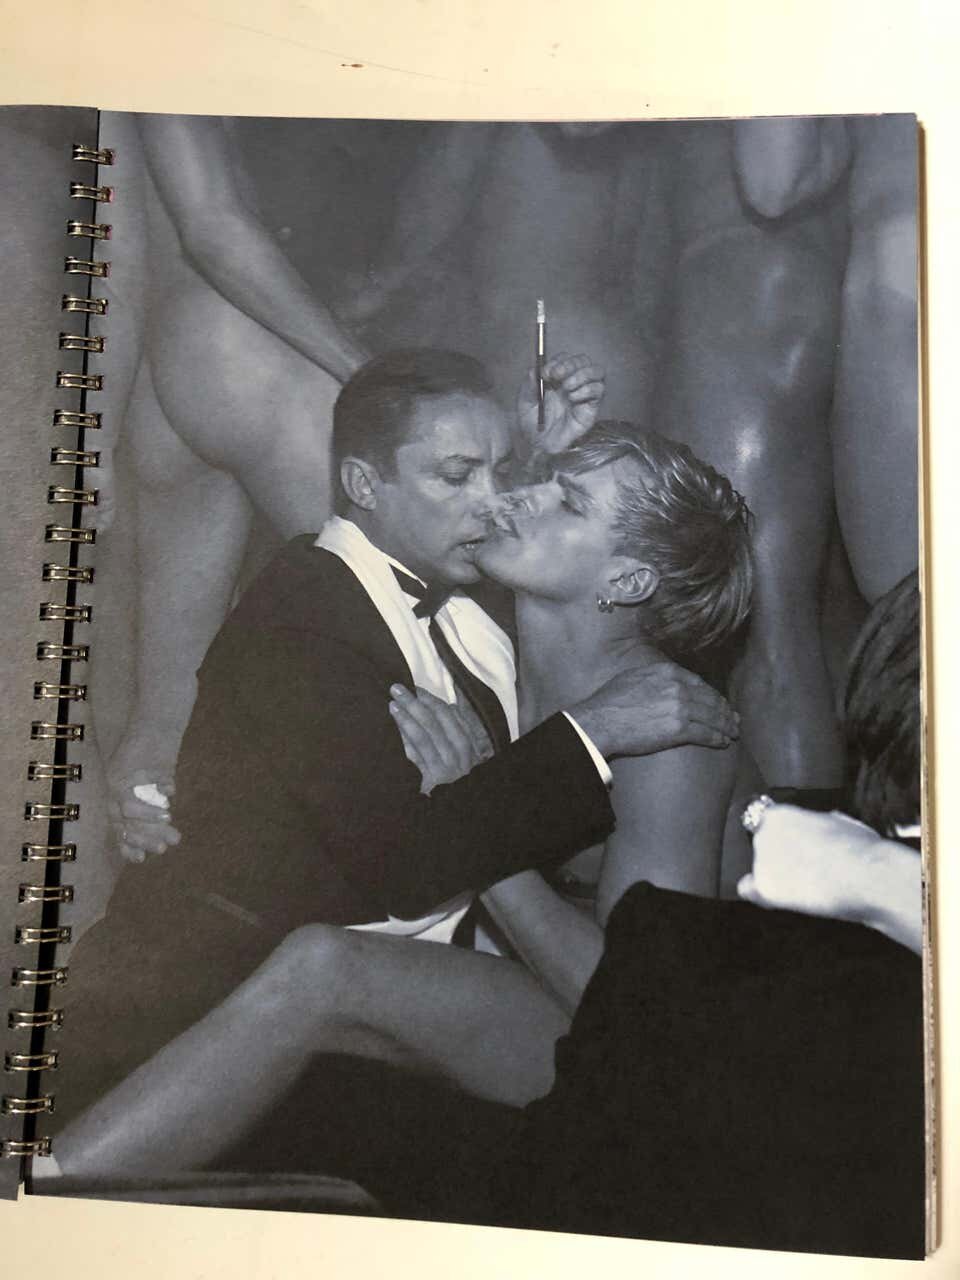 1992 Vade Retro French Edition of Madonna Sex Book Photographed by